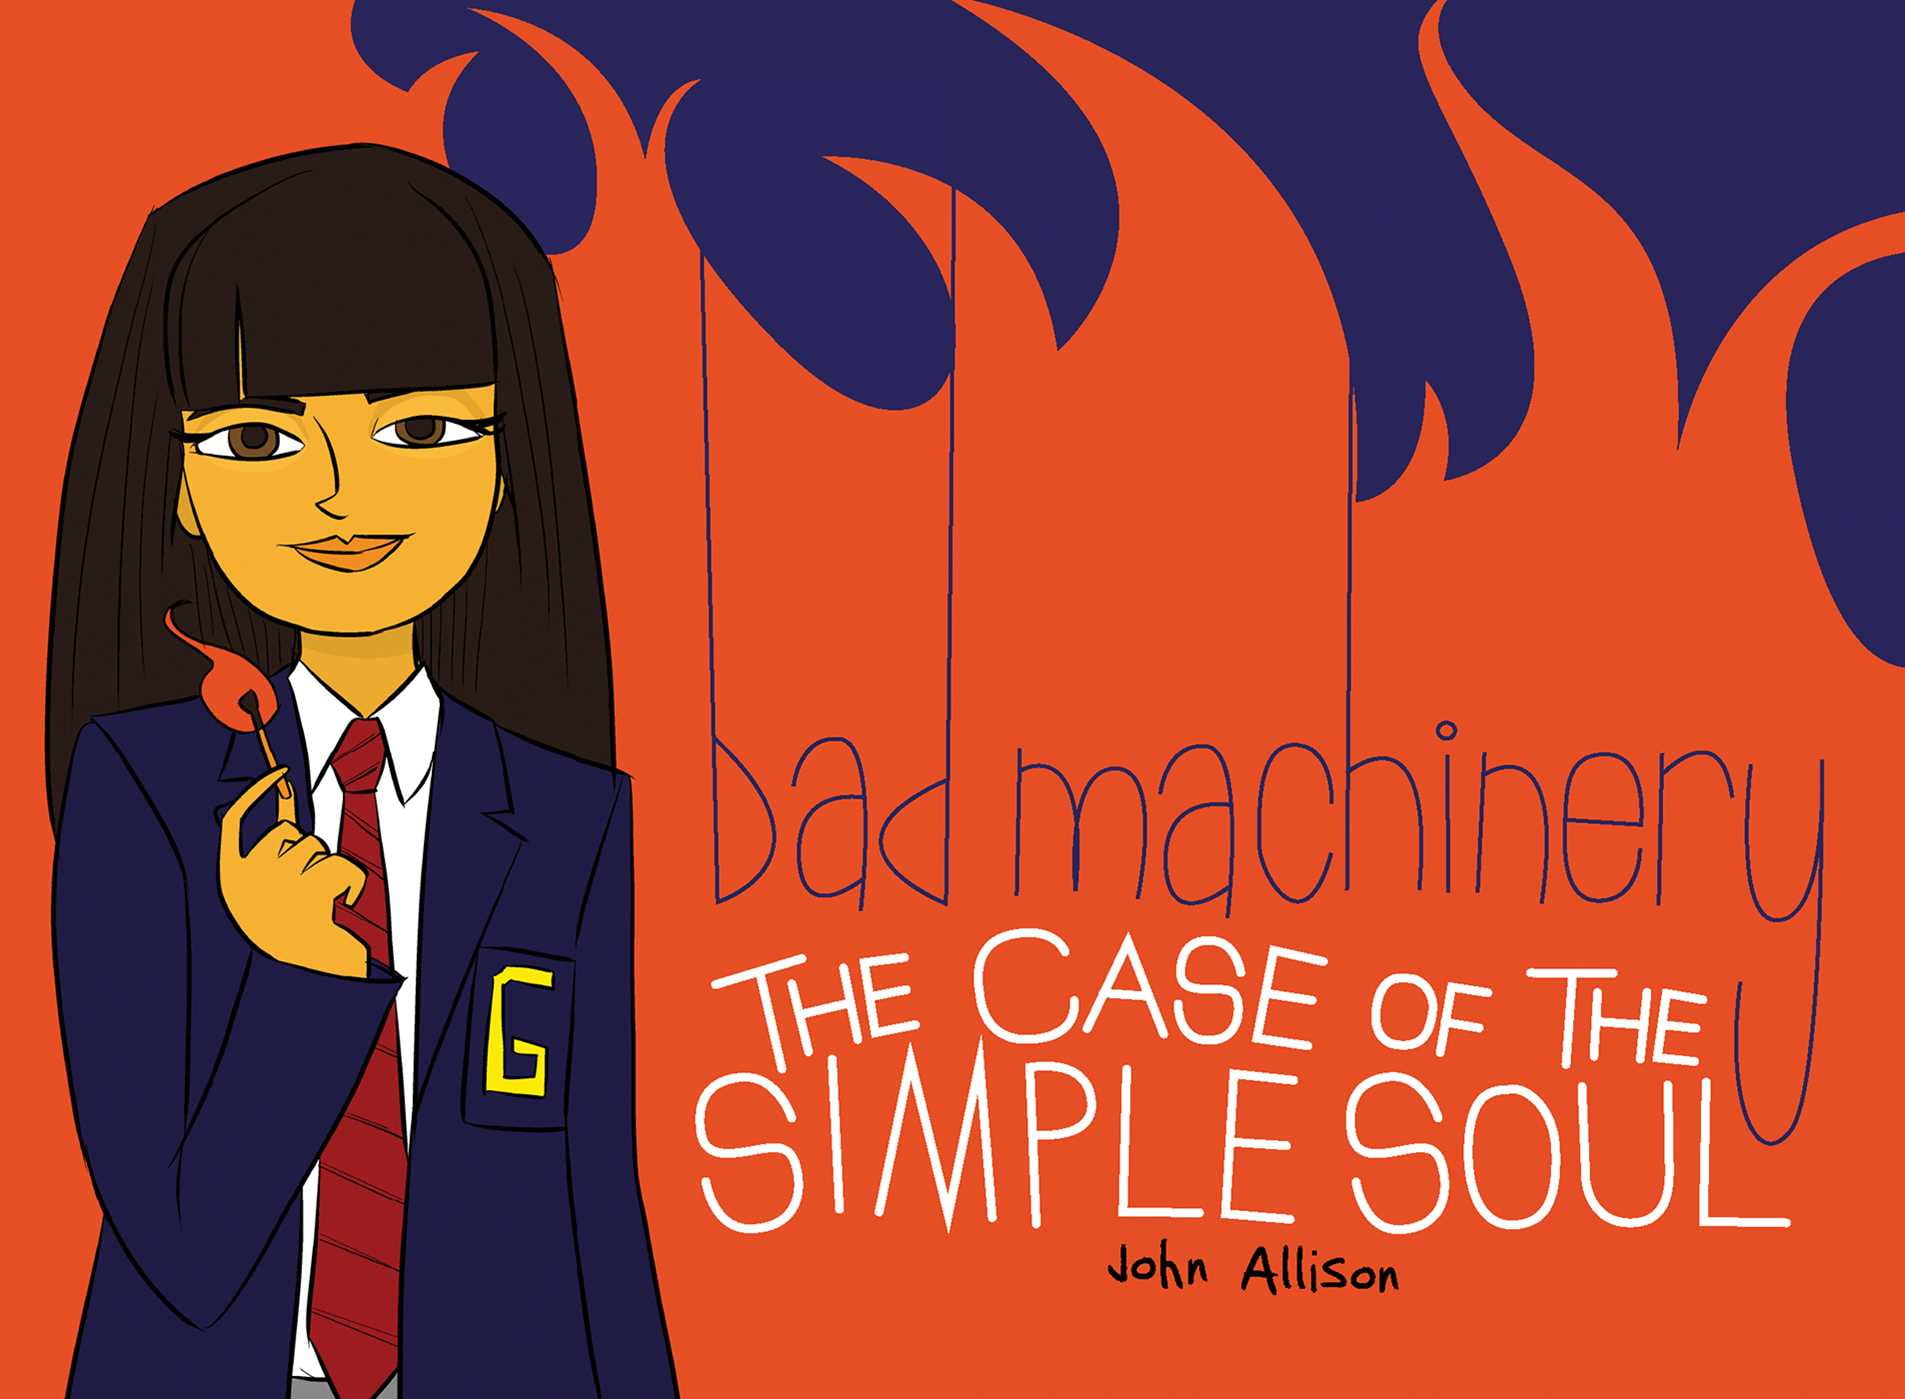 Bad Machinery Vol 3 The Case Of The Simple Soul